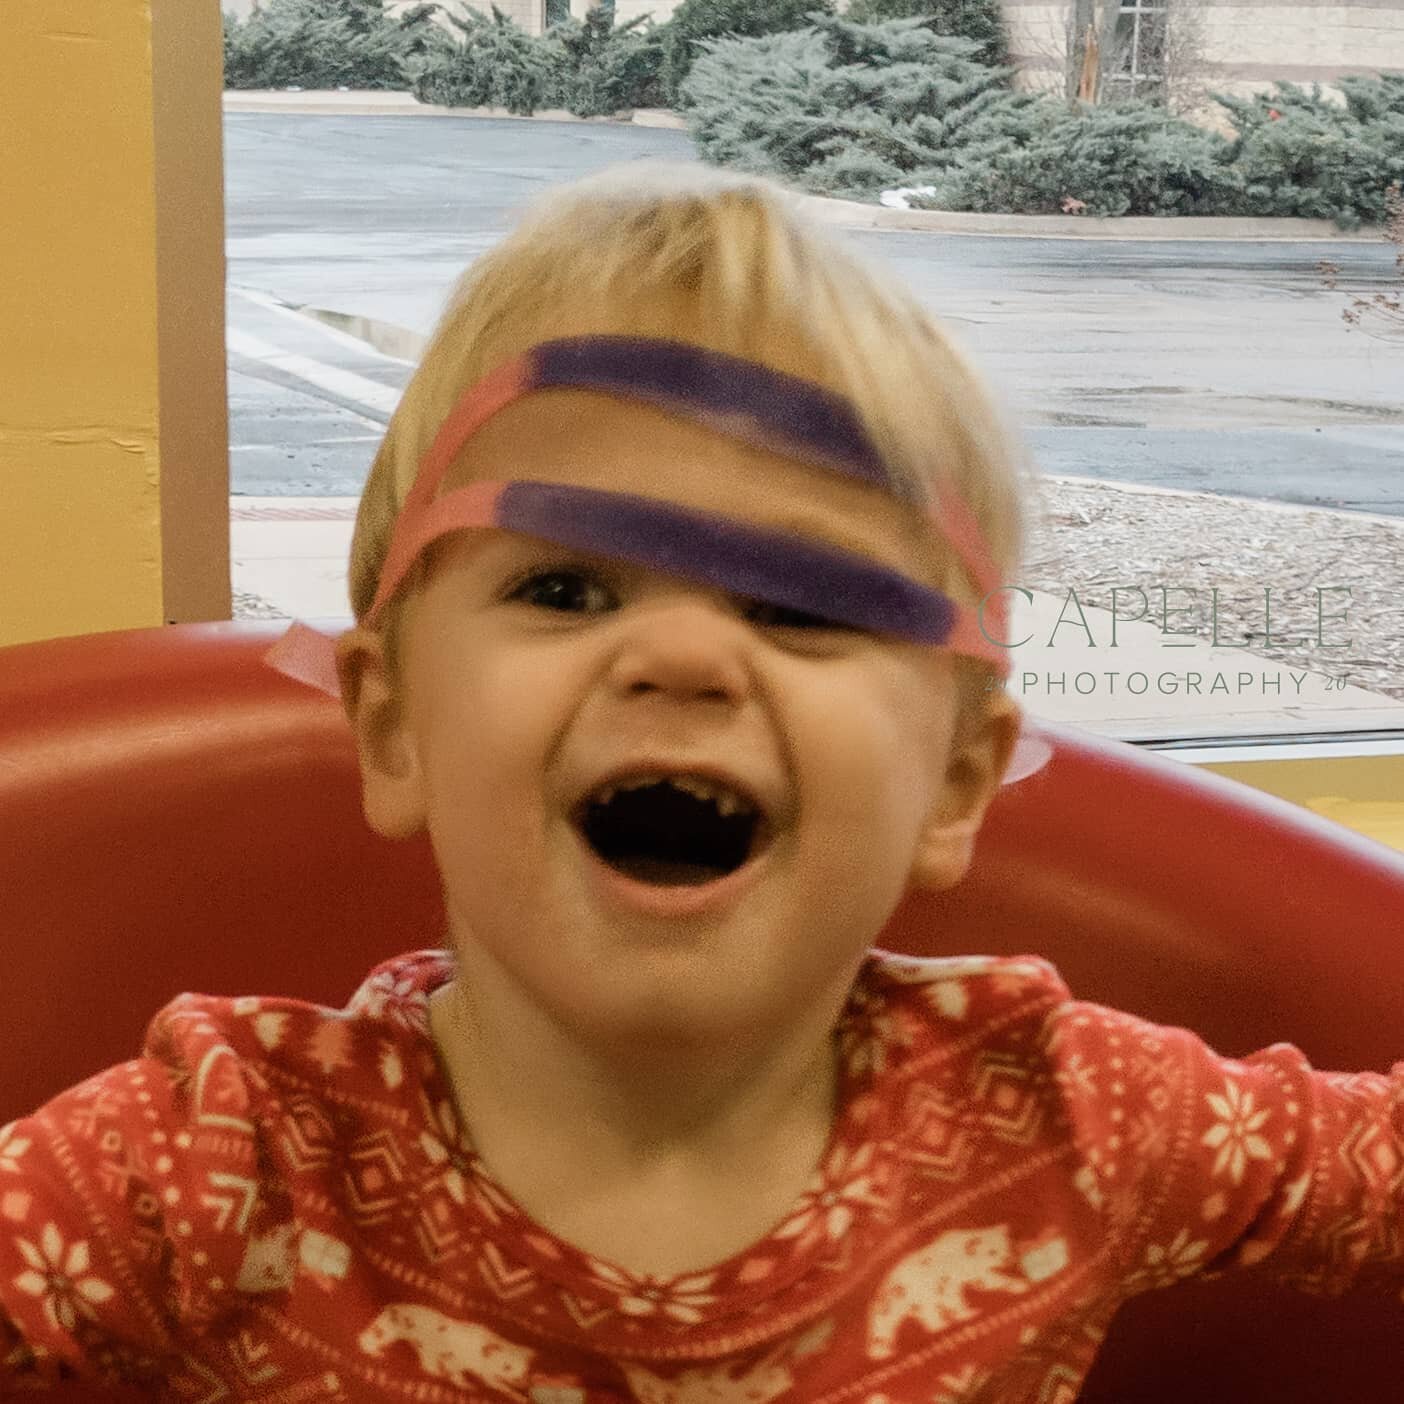 We all wear goggle like this, right??
.
.
.
.
#ohhcap #aquatotsswimschool #swimlessons #swimming